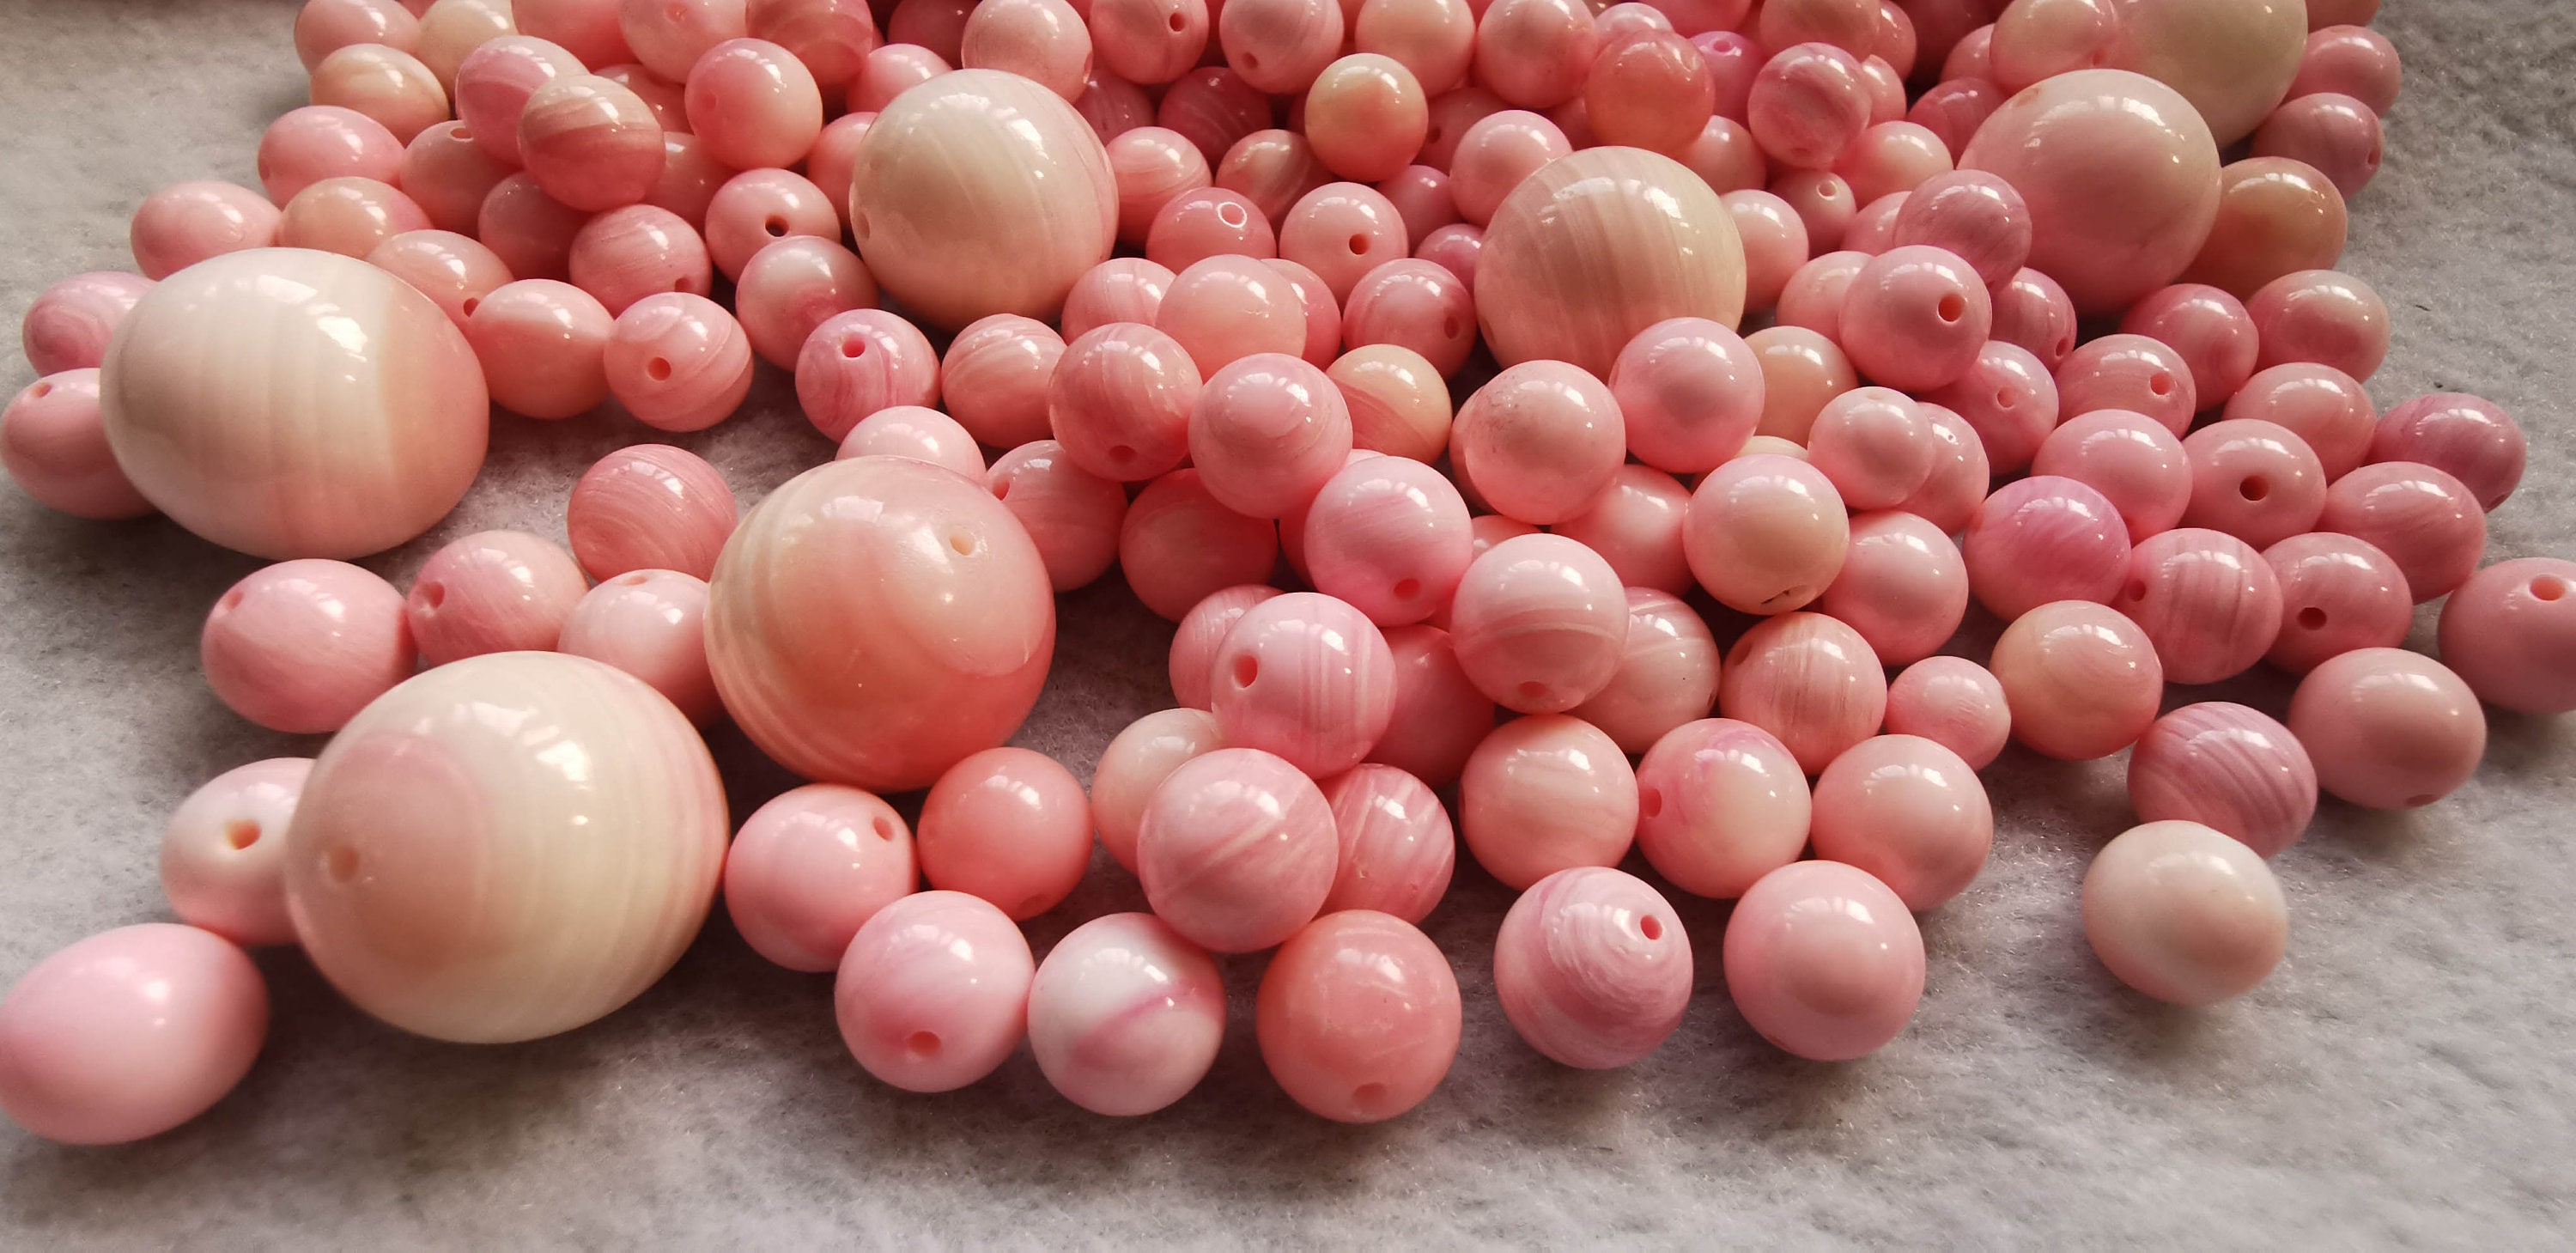 Wooden Beads Wooden Beads 25 Mm Pink 4 Pieces Large Wooden Balls High Gloss Large  Wooden Beads 25 Mm Beads 25 Mm Pink Beads Big Wood Beads 